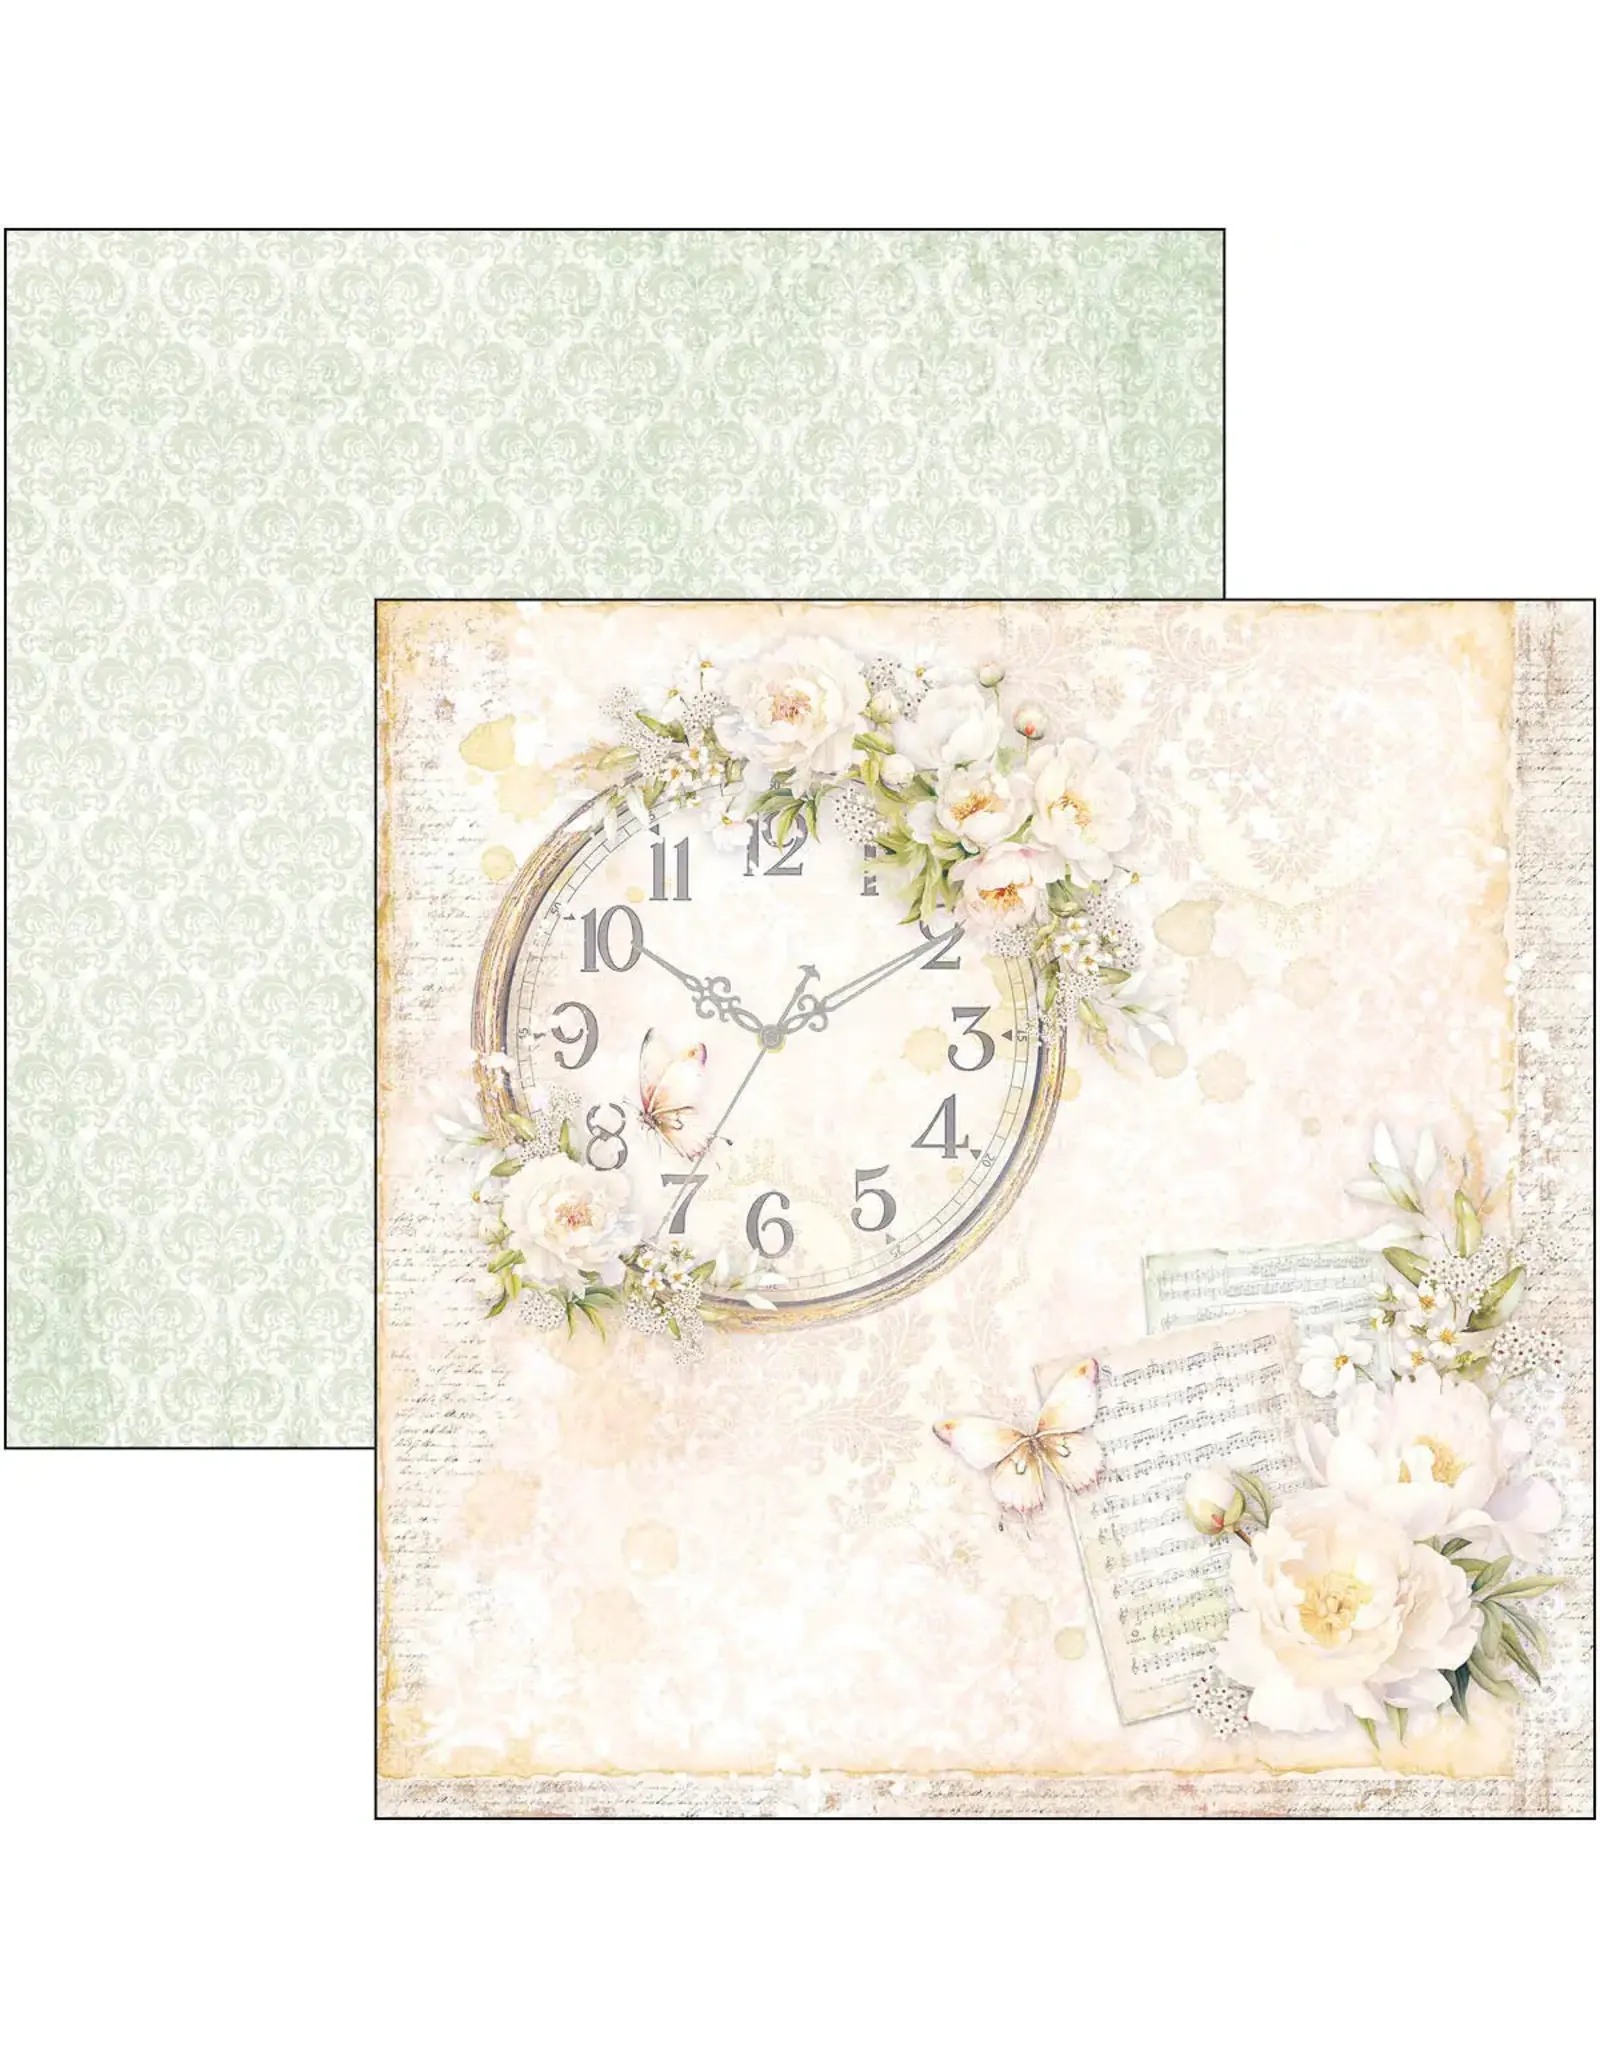 CIAO BELLA CIAO BELLA ALWAYS & FOREVER 12x12 PATTERNS PAD 8 SHEETS